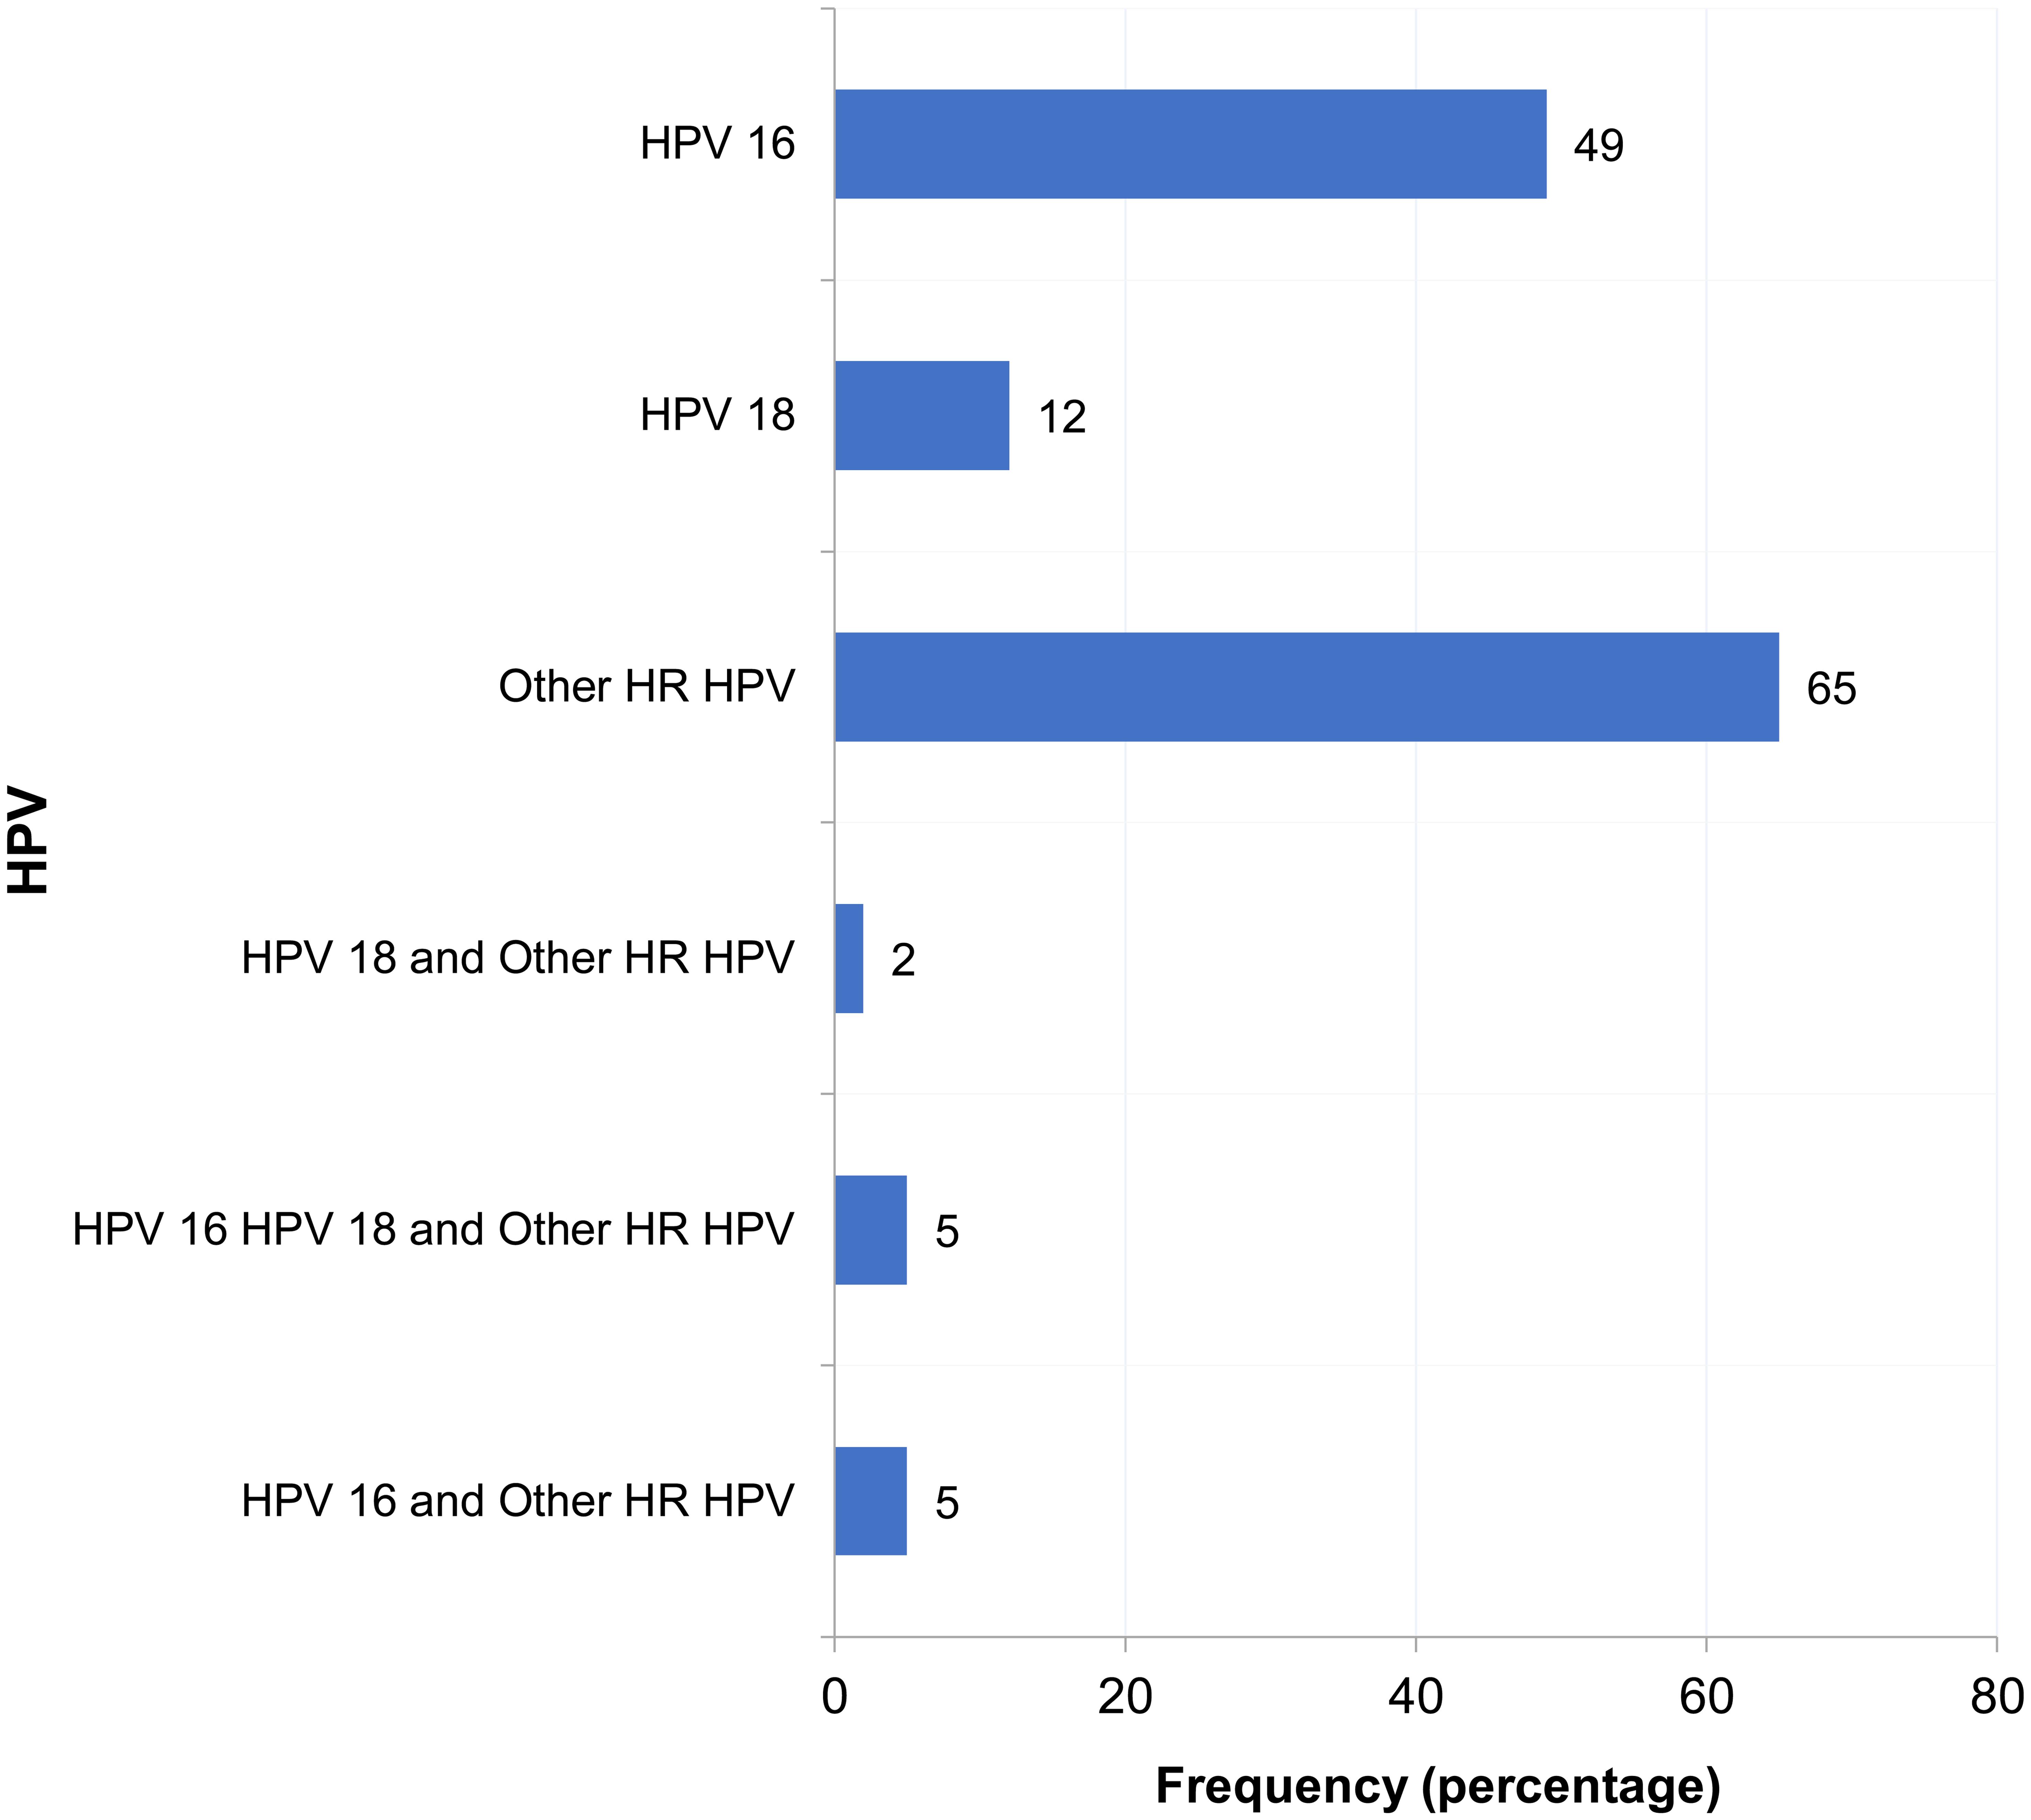 HR-HPV (high-risk human papillomavirus) genotypes among women with positive screening results (n = 138).